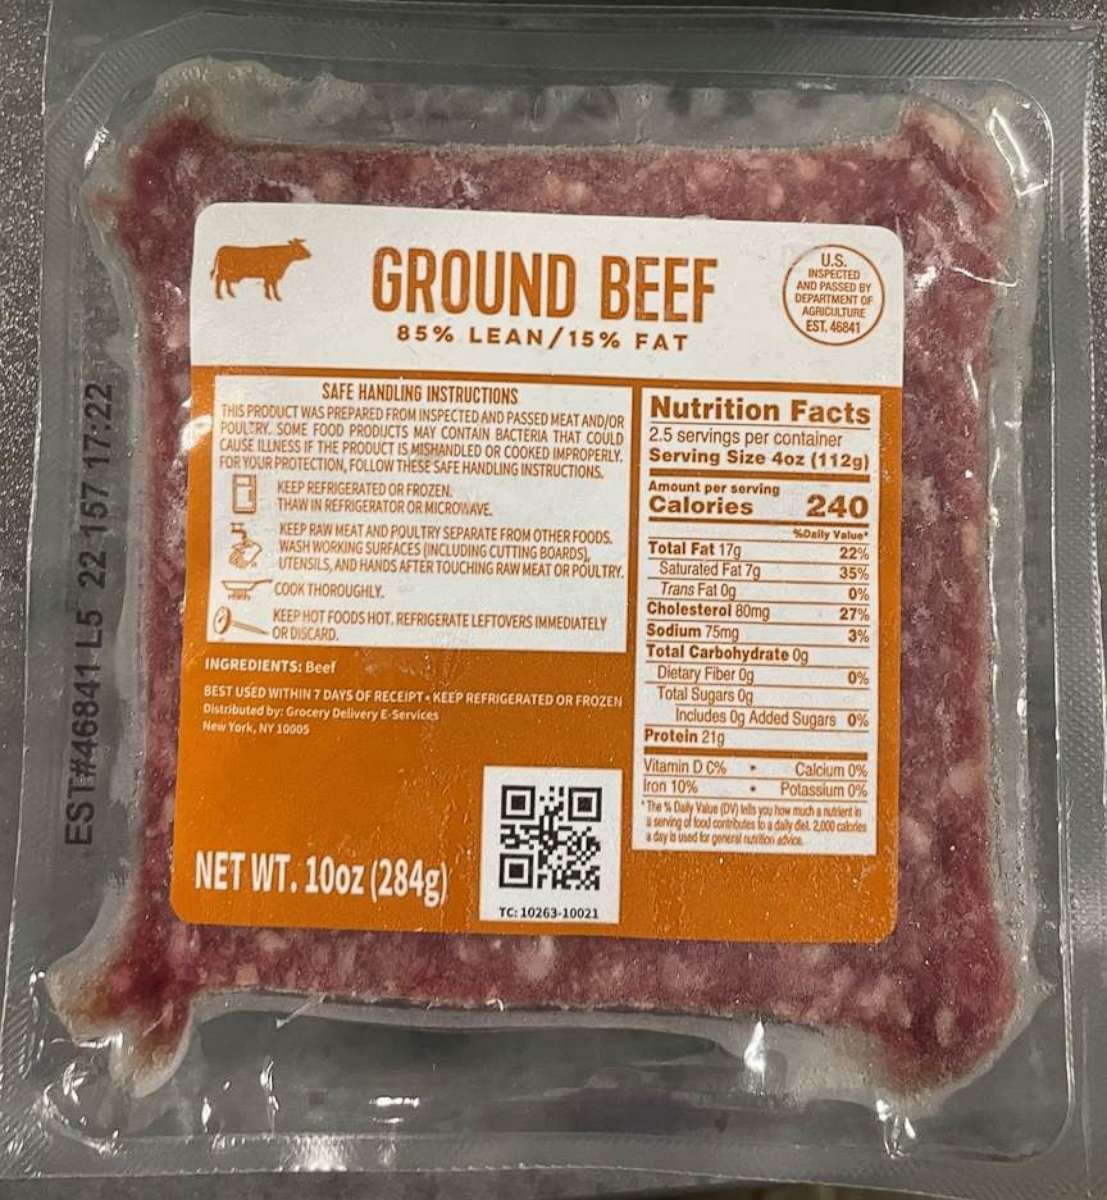 PHOTO:  The U.S. Department of Agriculture’s Food Safety is issuing a public health alert due to concerns that ground beef products in HelloFresh meal kits may be part contaminated with E. coli.